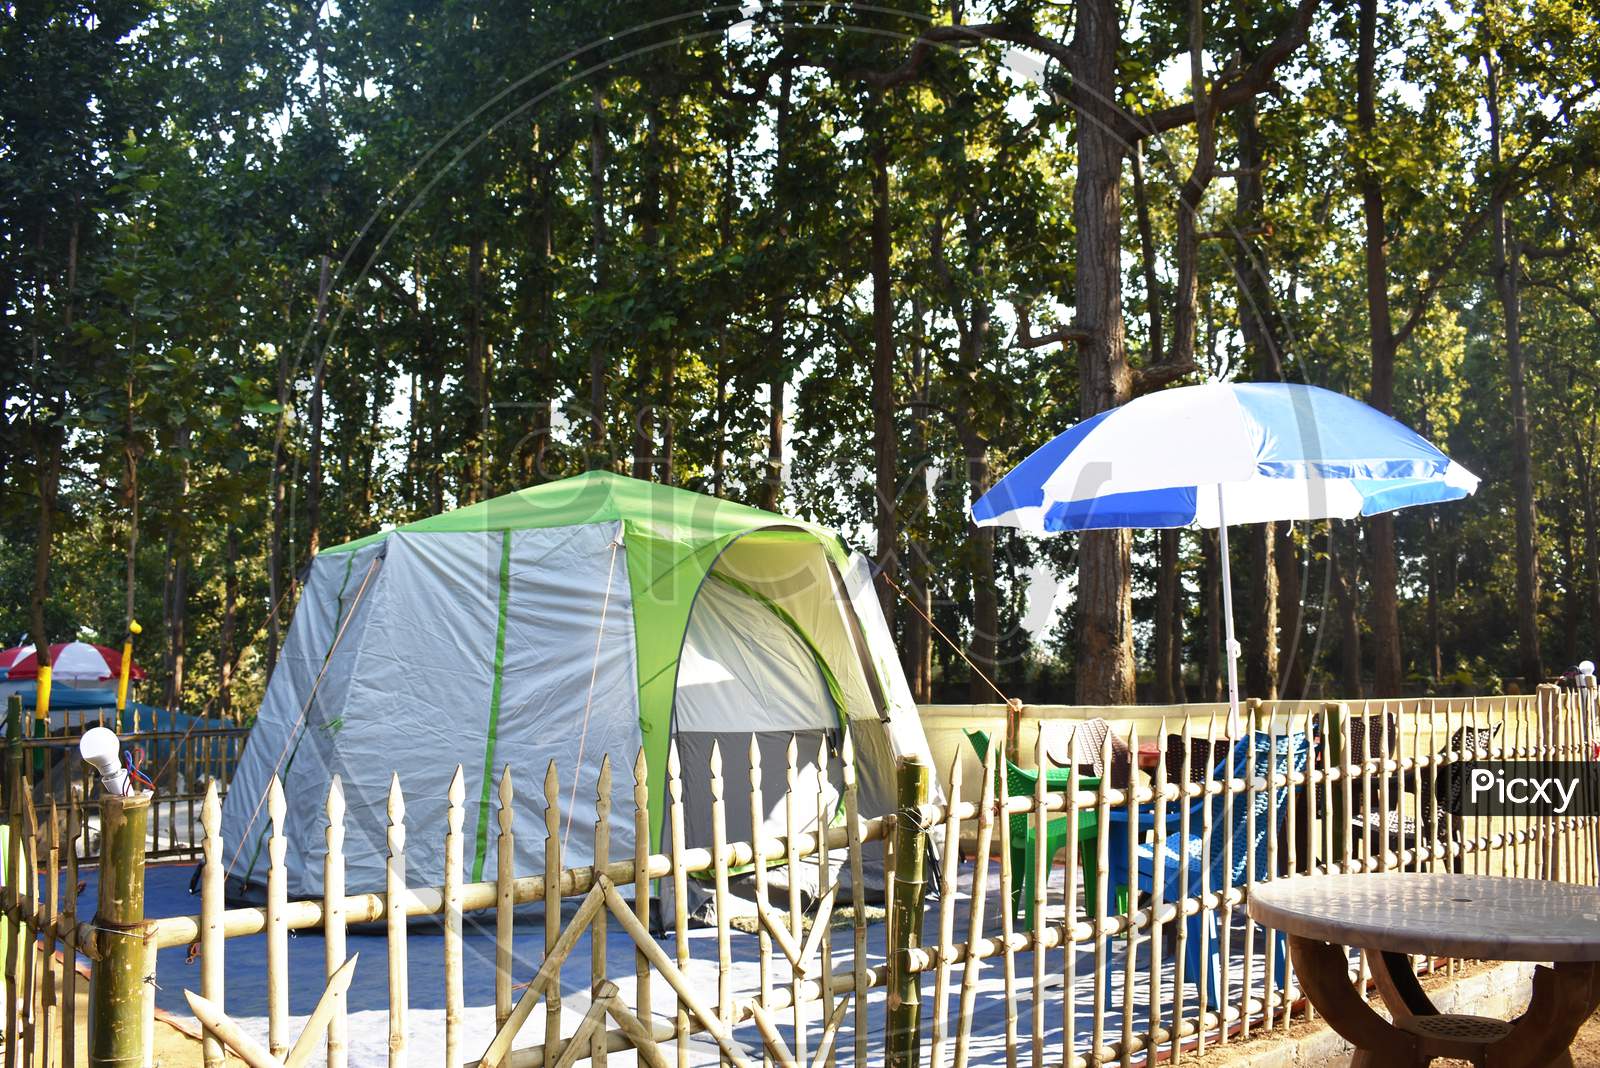 Green Tent In A Resort Between A Forest With Green Trees In The Surroundings